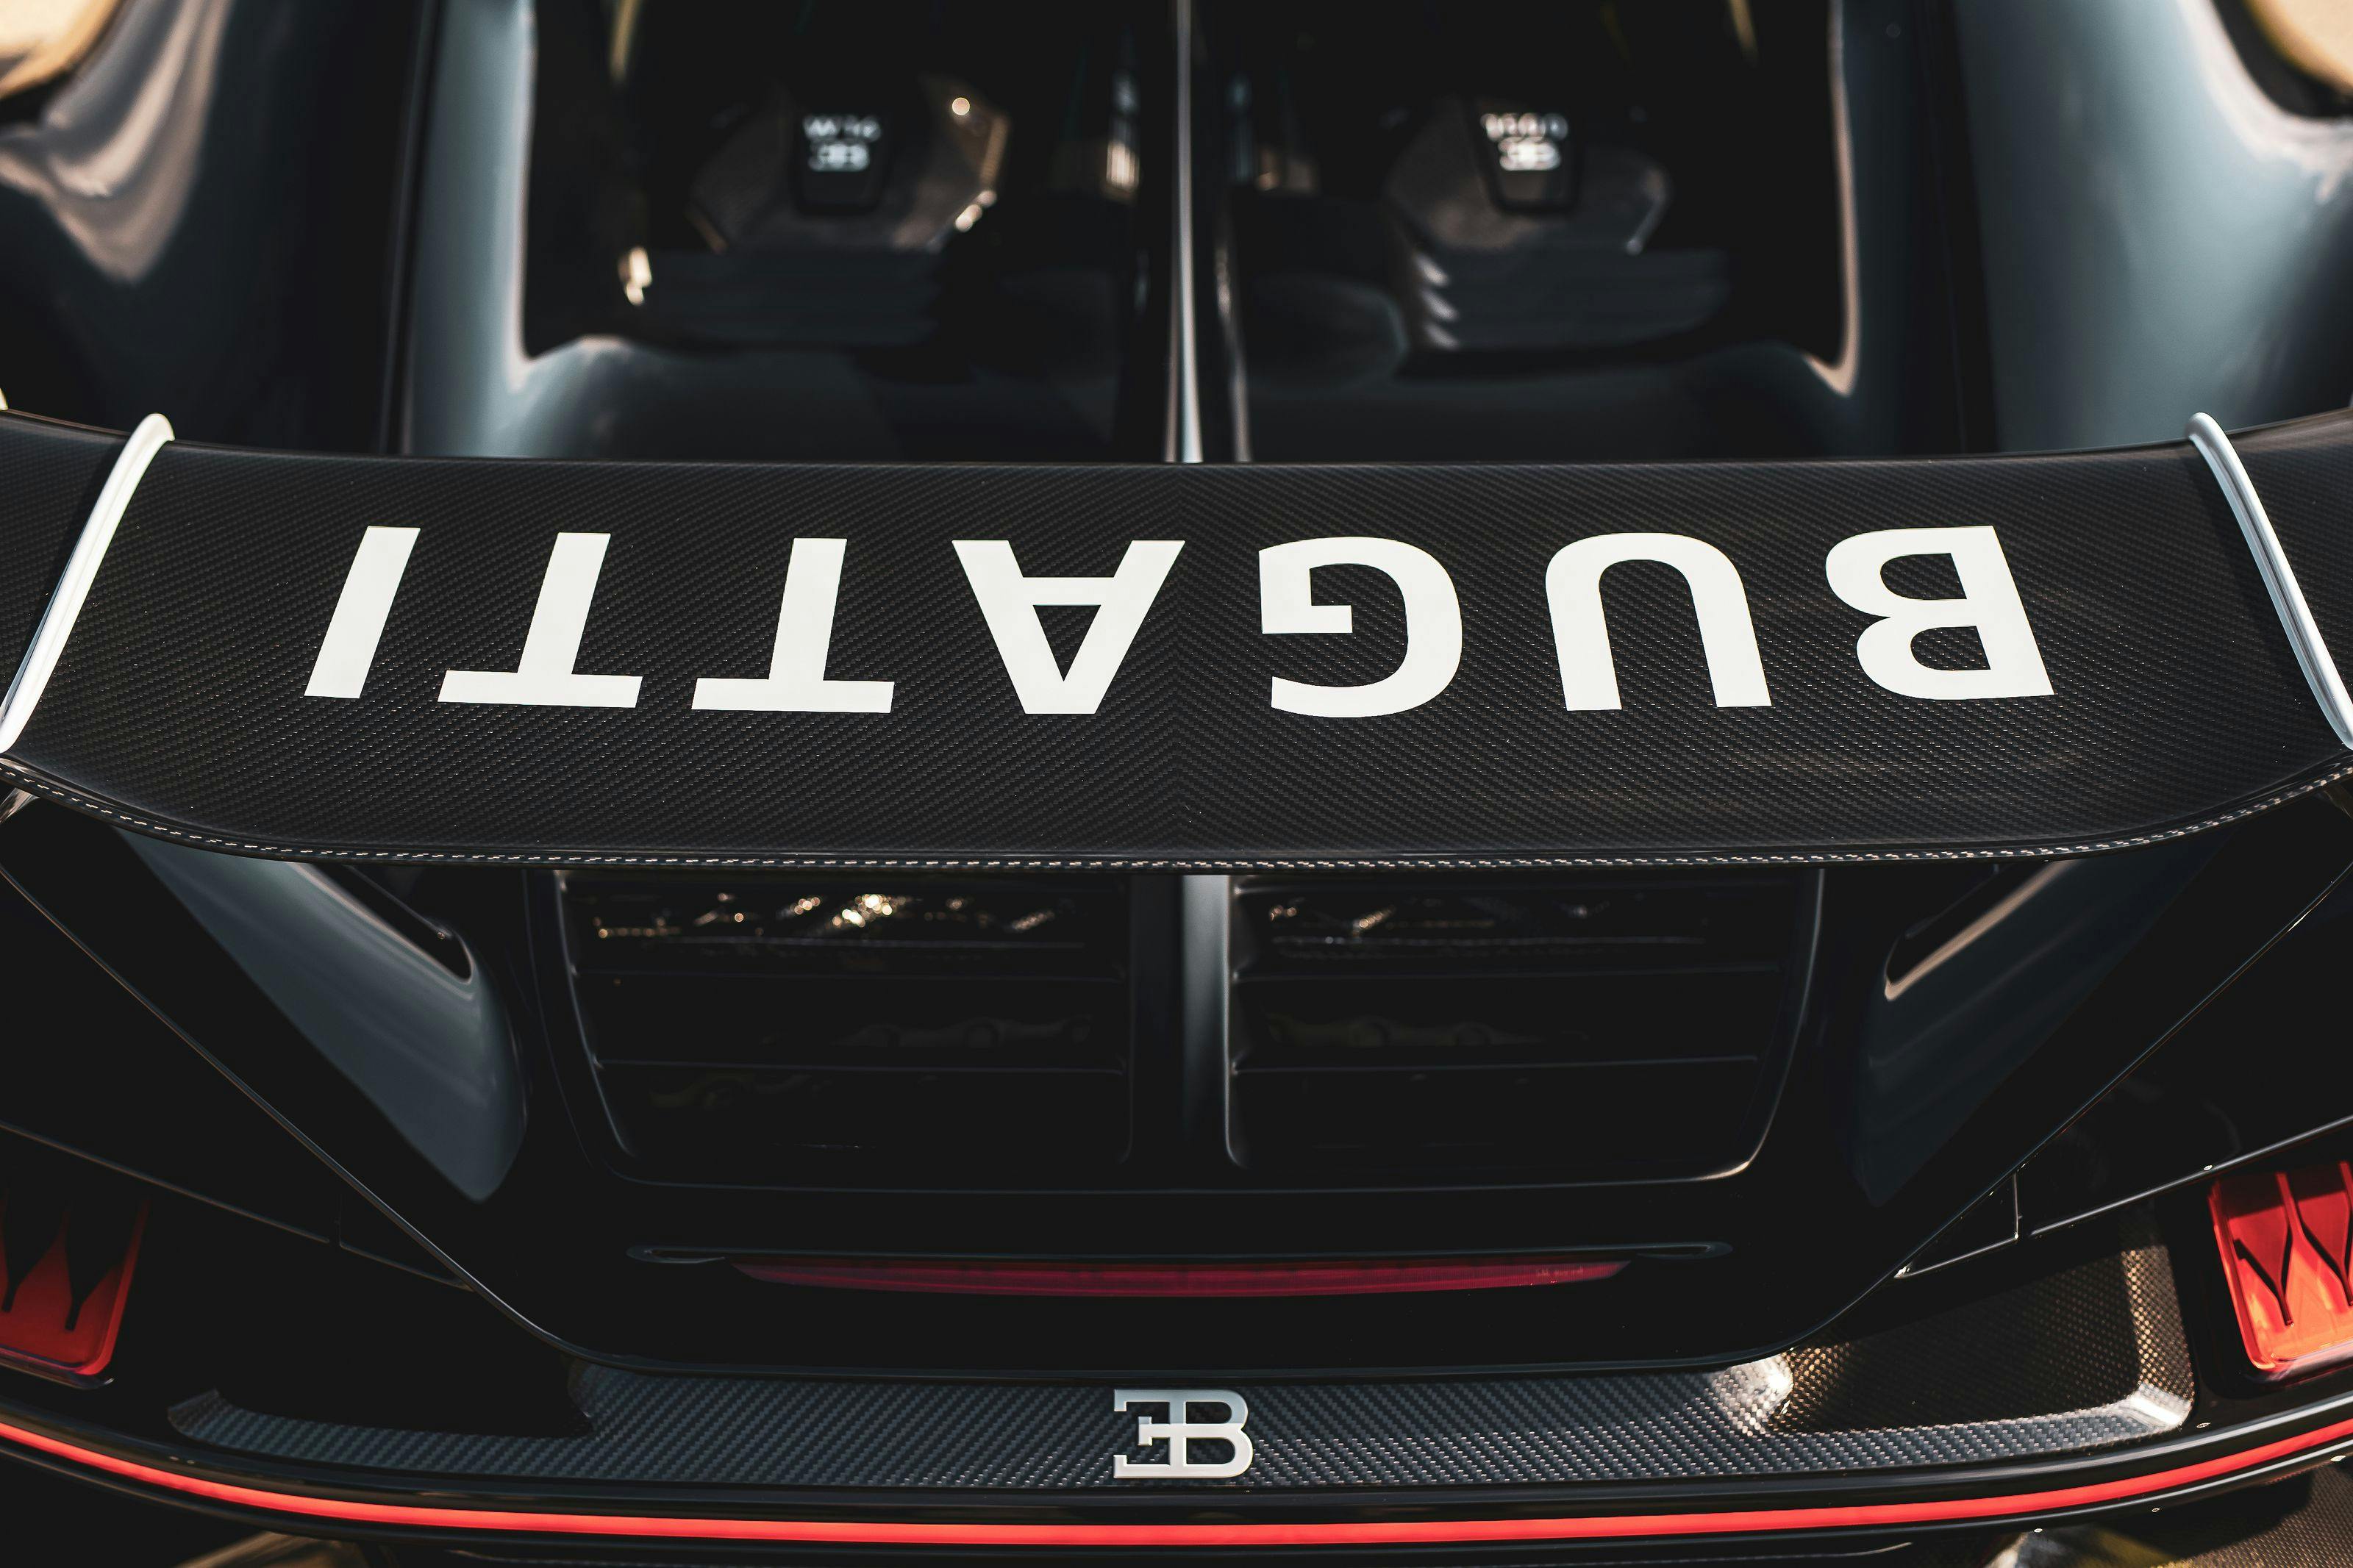 Bugatti production – the 300th Chiron leaves the Atelier in Molsheim